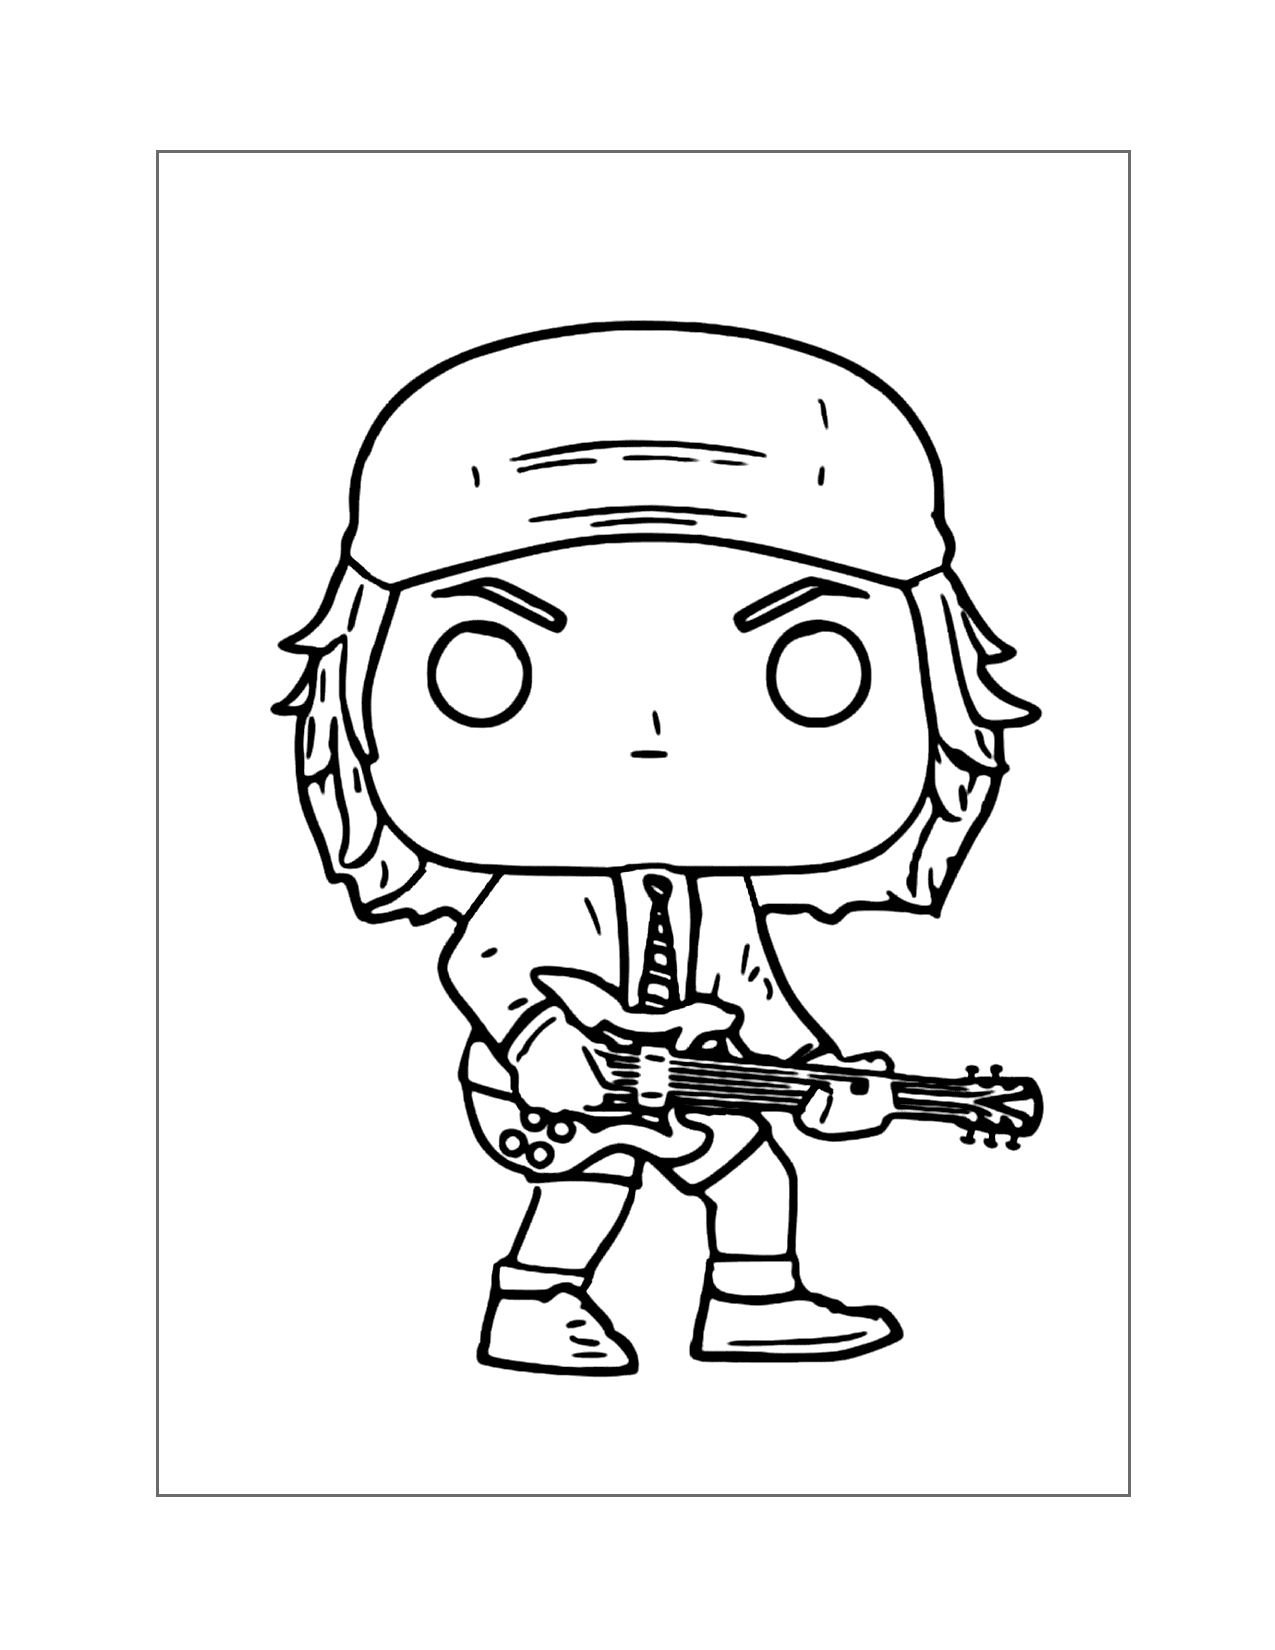 Angus Young Acdc Funko Pop Coloring Page